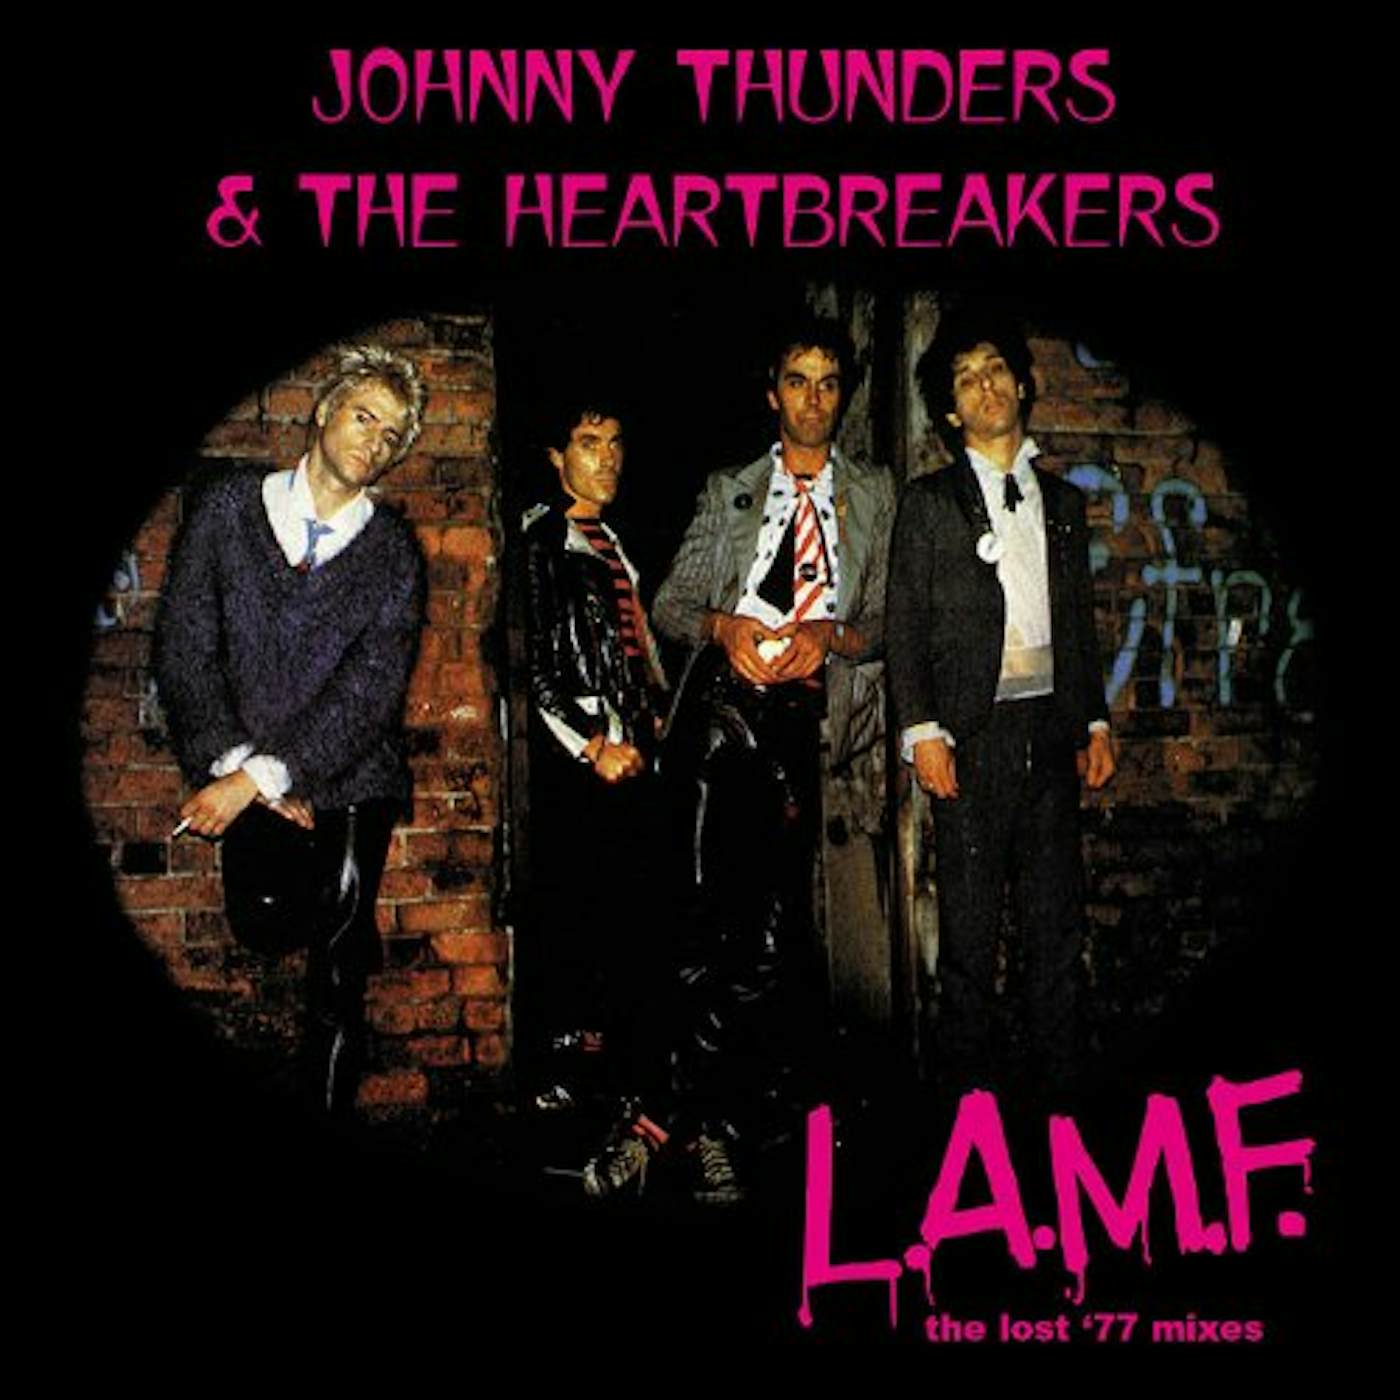 Johnny Thunders & The Heartbreakers L.A.M.F.: THE LOST '77 MIXES Vinyl Record